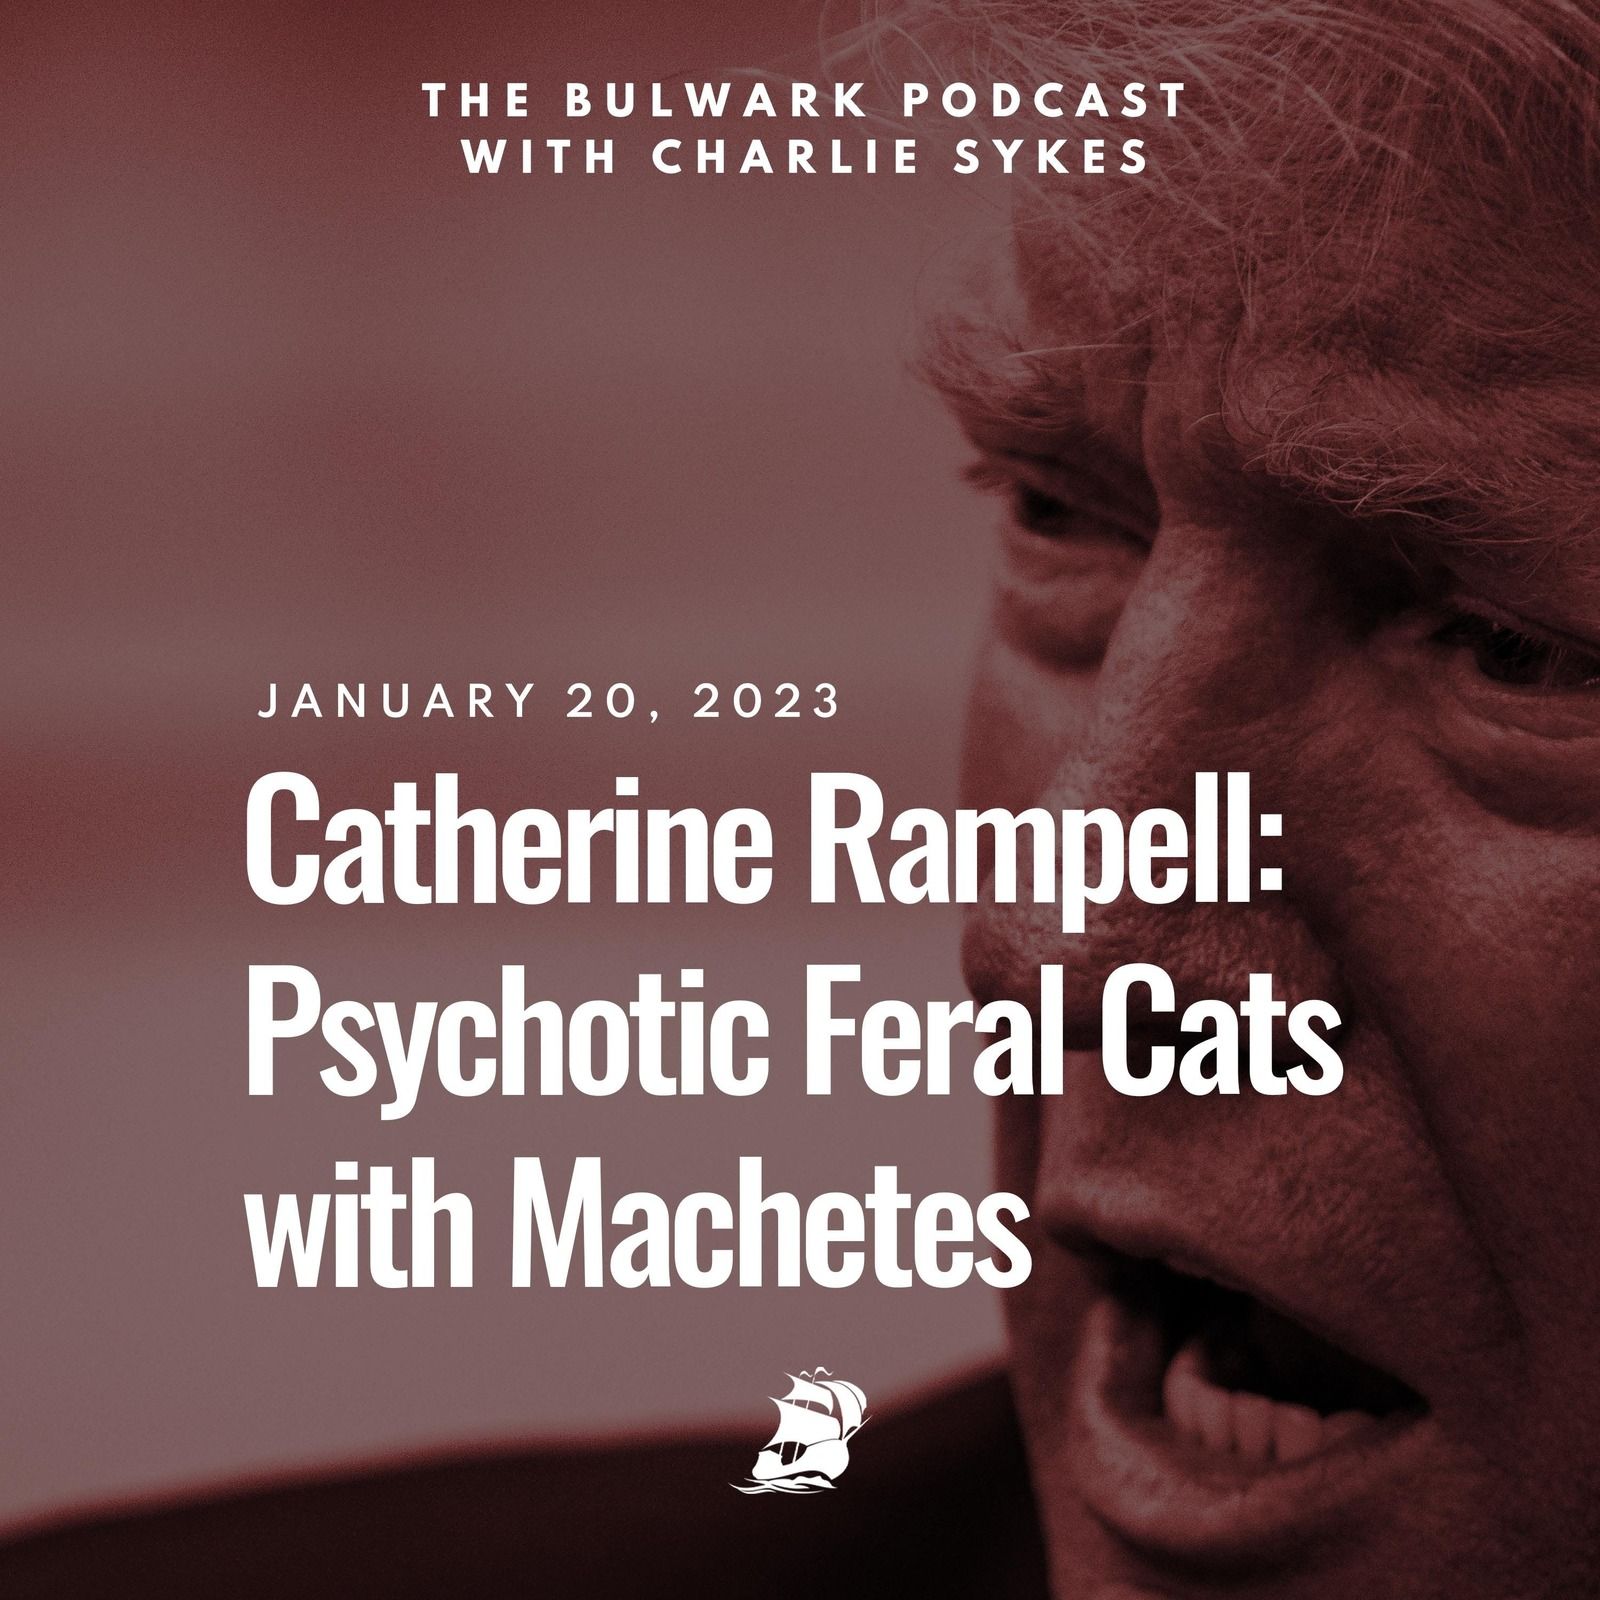 Catherine Rampell: Psychotic Feral Cats with Machetes by The Bulwark Podcast